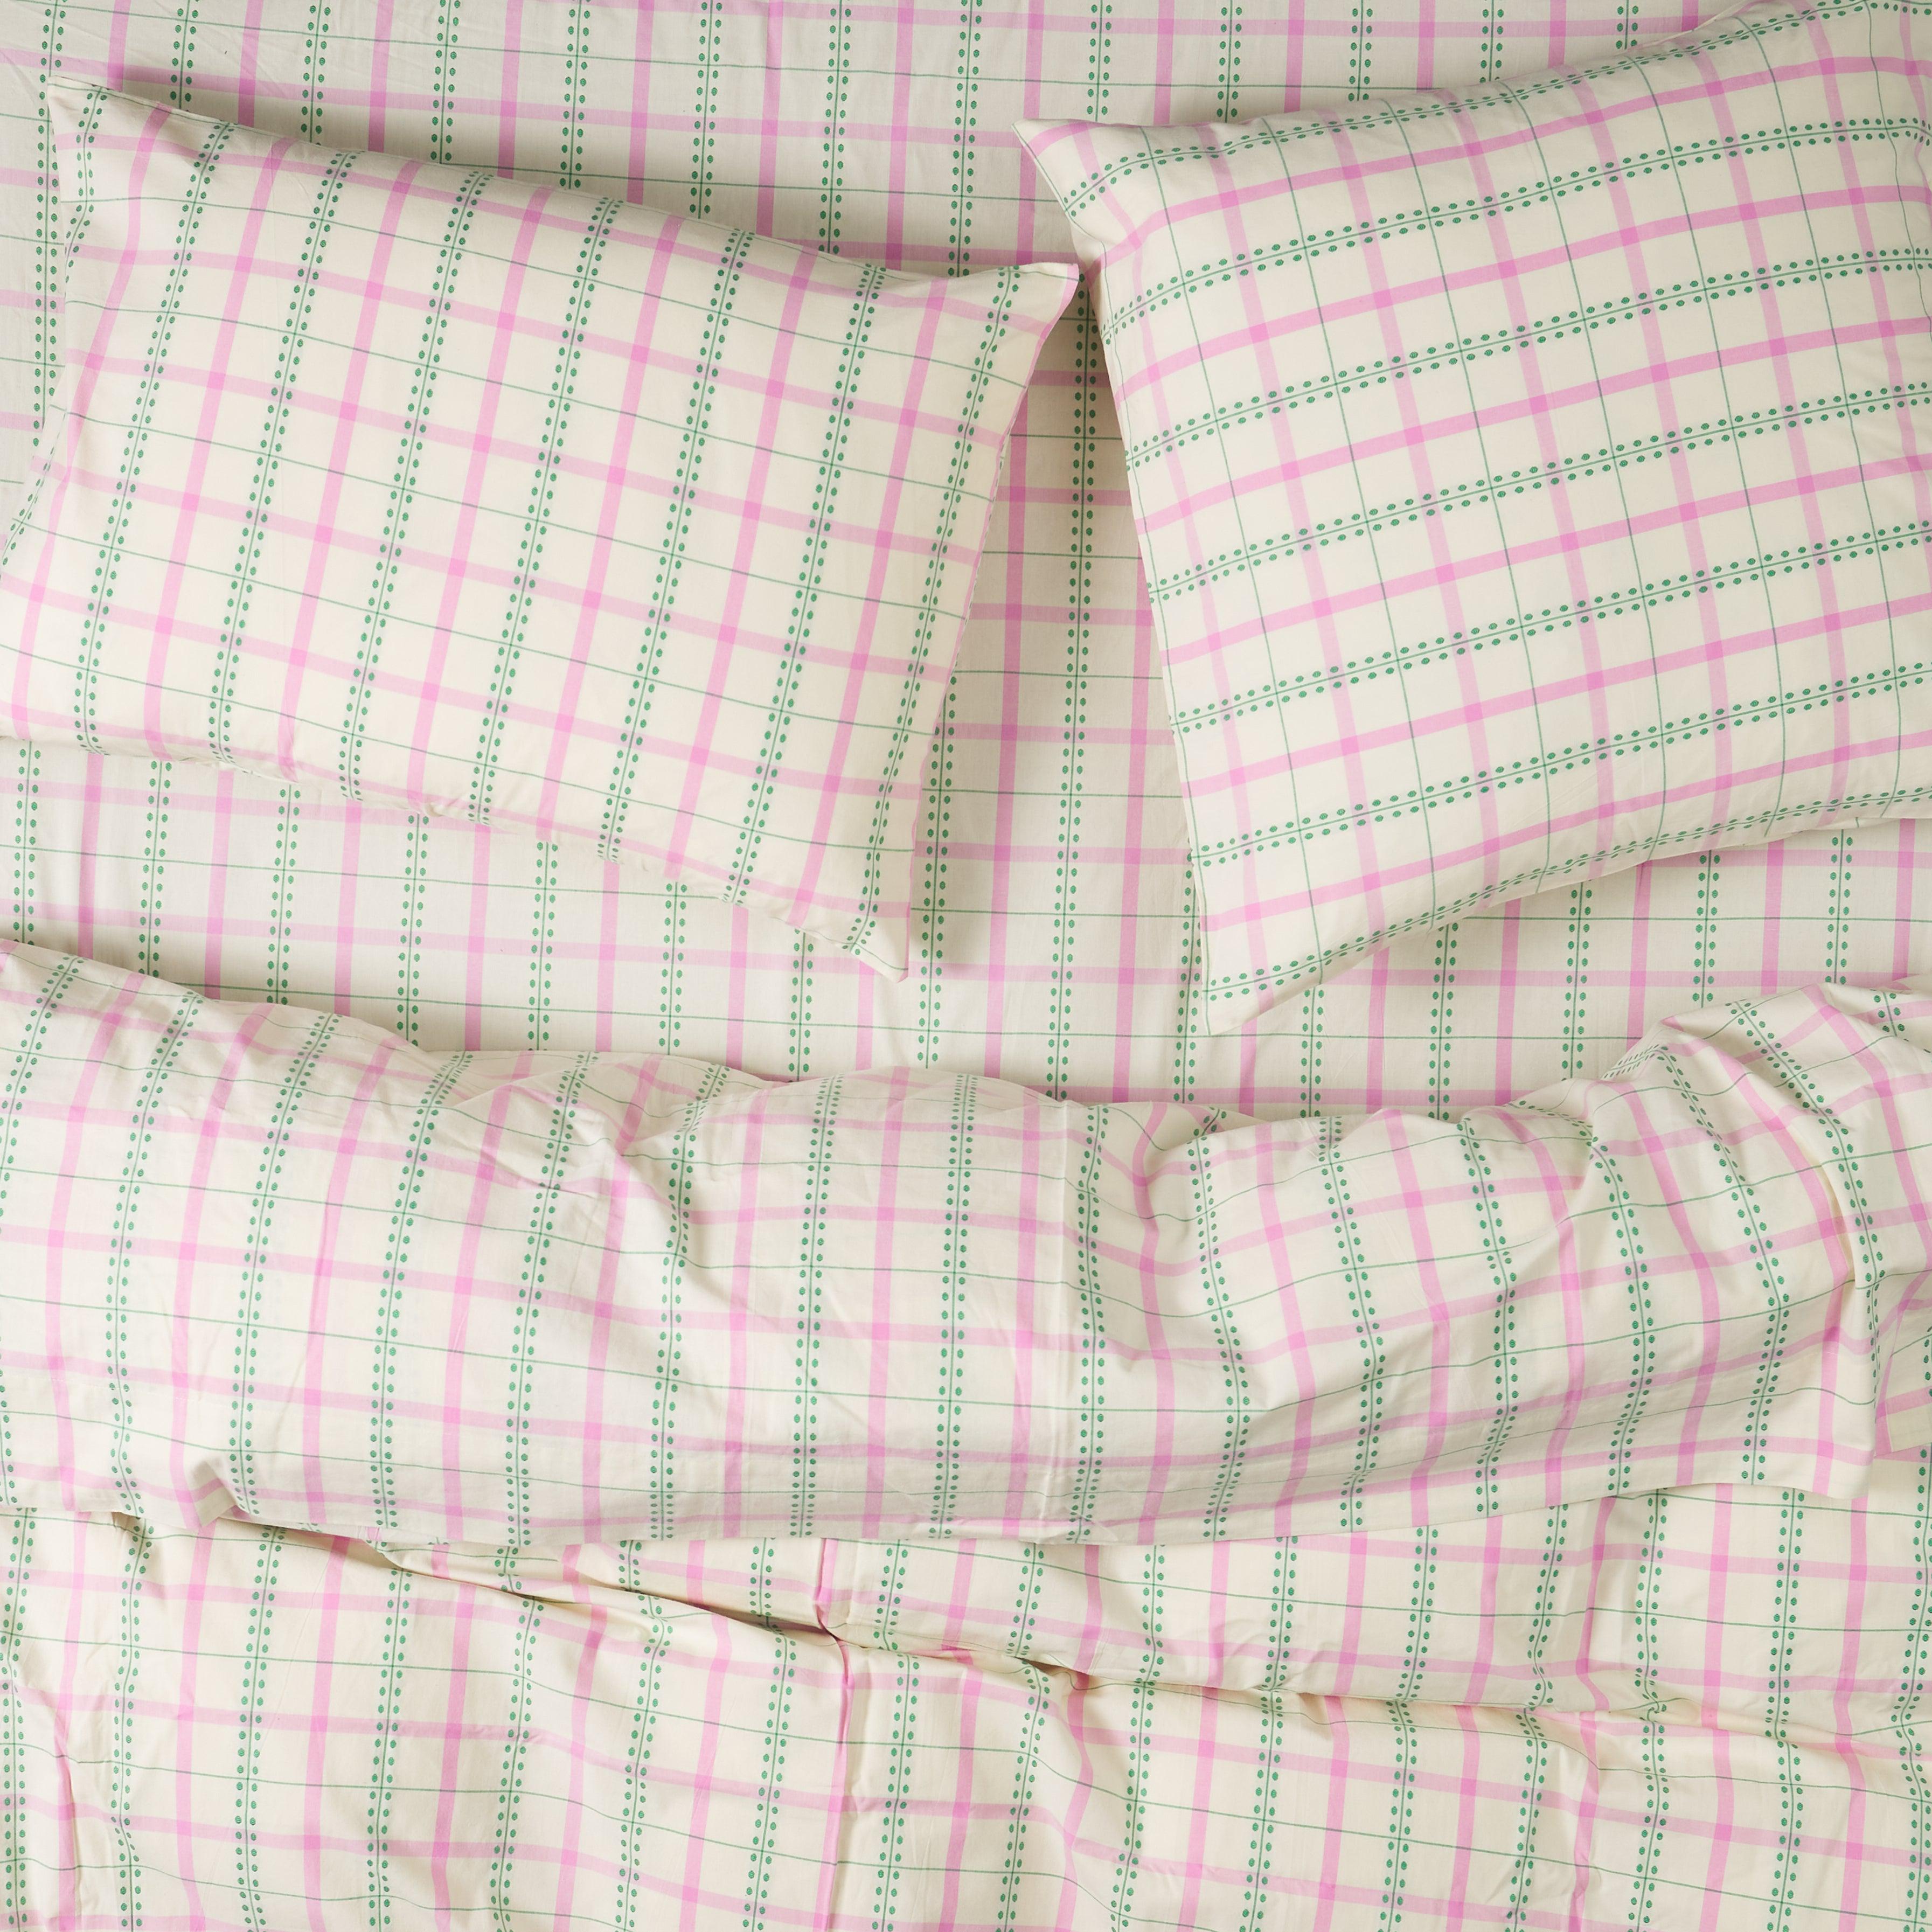 Mica Cotton Euro Pillowcase Set-Soft Furnishings-PLAY by Sage & Clare-The Bay Room